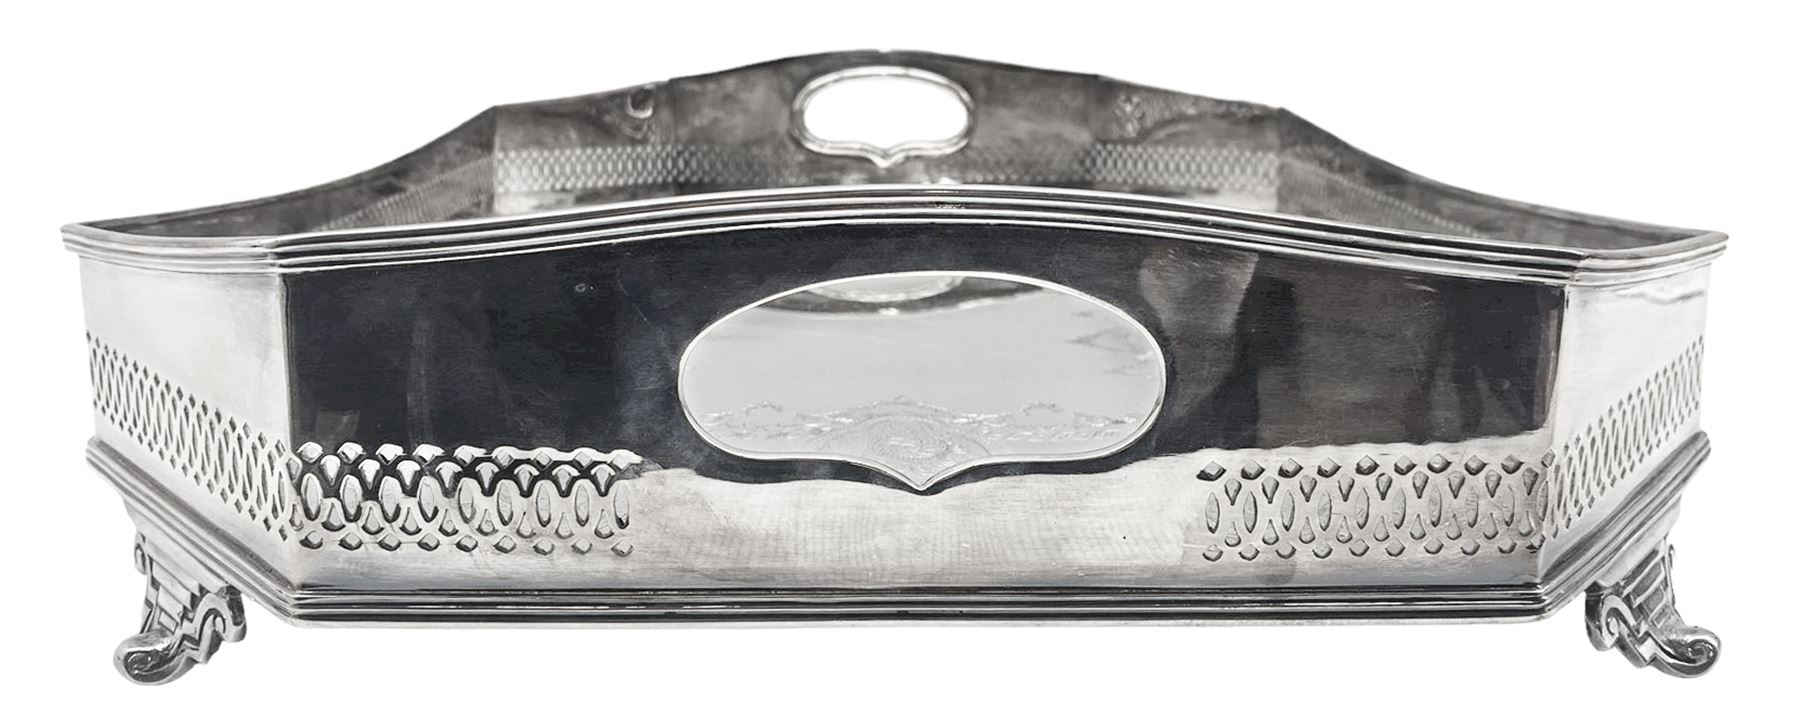 Early 20th century silver-plated tea tray by James Deakin & Sons - Image 5 of 8